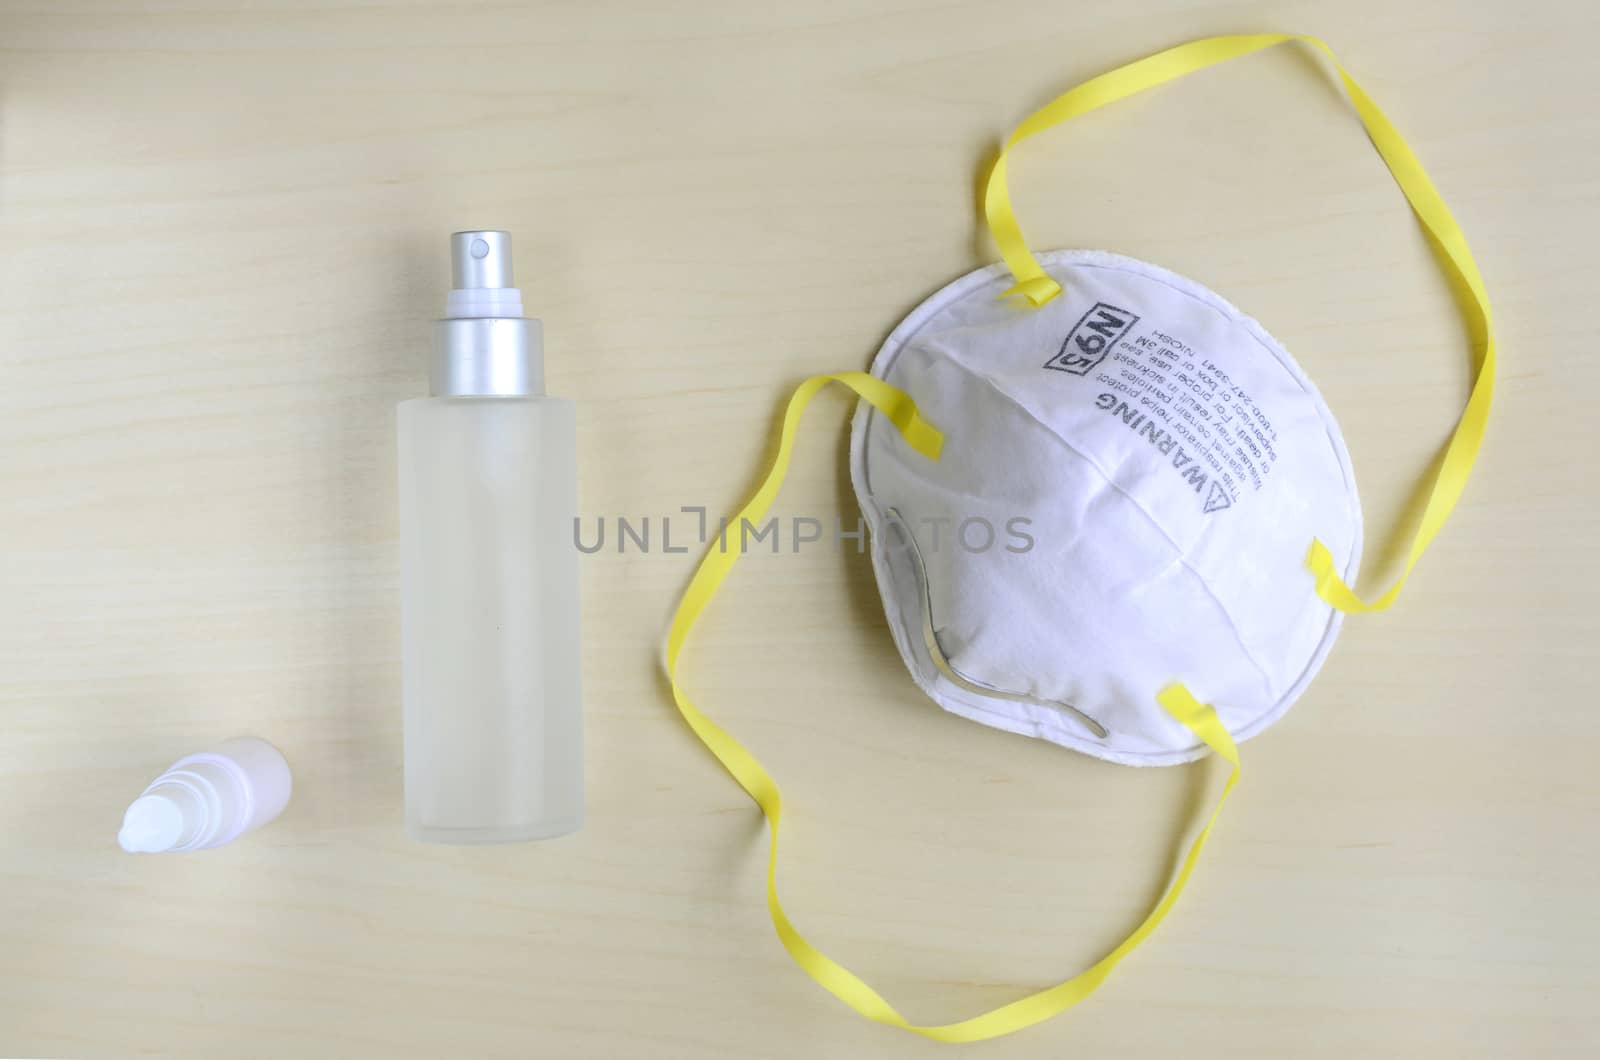 N95 respirator  with alcohol sanitizer gel on wooden background for covid-19 Coronavirus prevention concept.